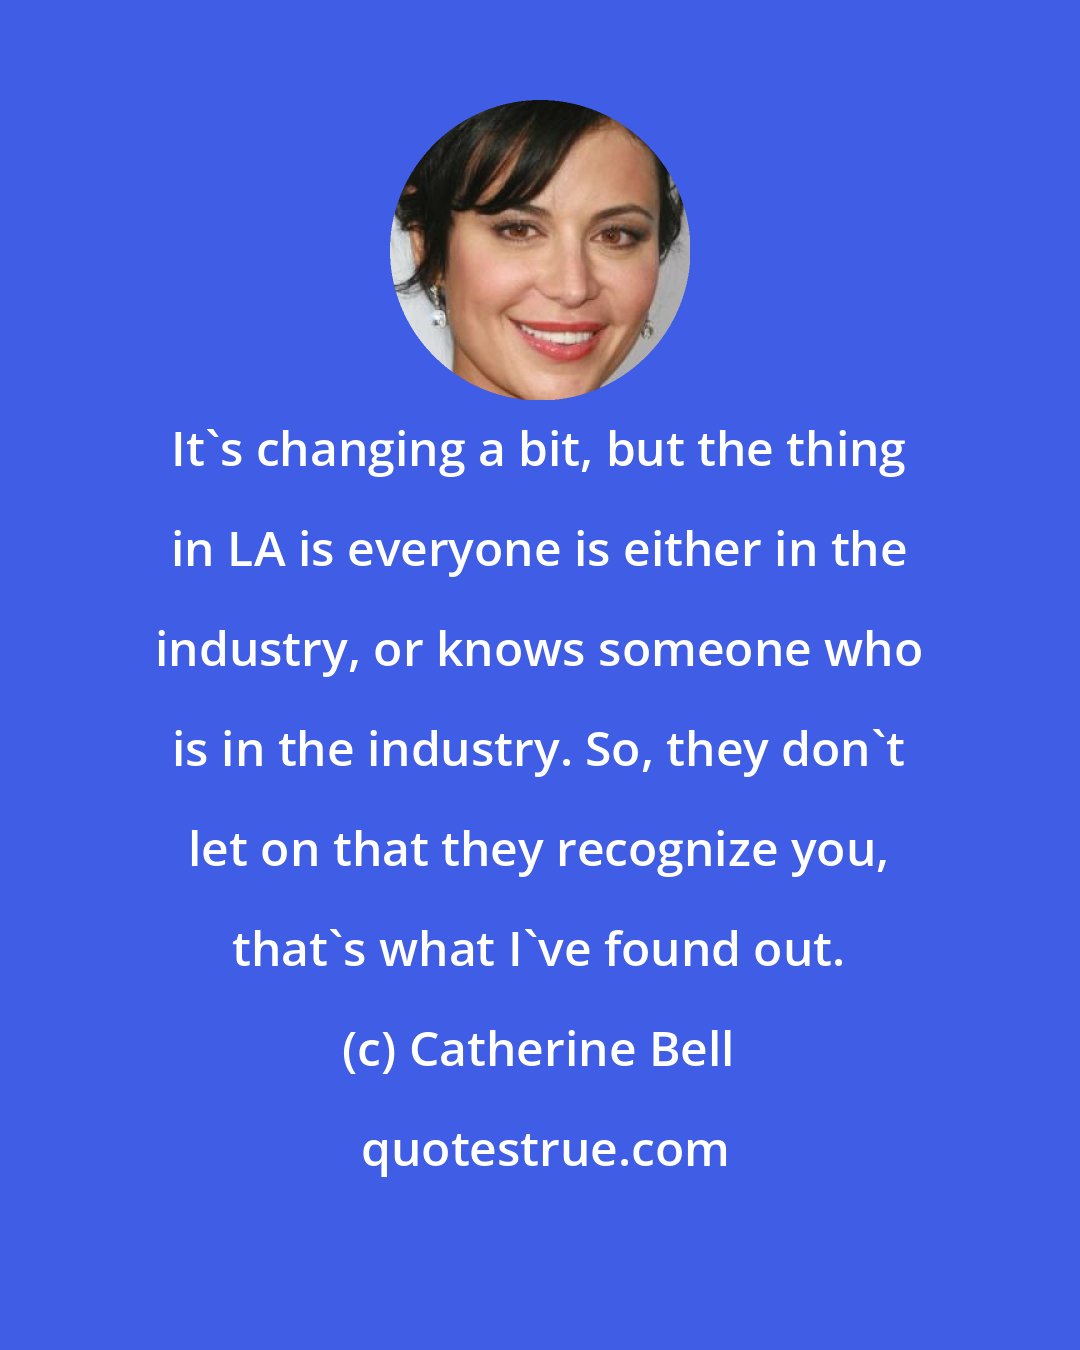 Catherine Bell: It's changing a bit, but the thing in LA is everyone is either in the industry, or knows someone who is in the industry. So, they don't let on that they recognize you, that's what I've found out.